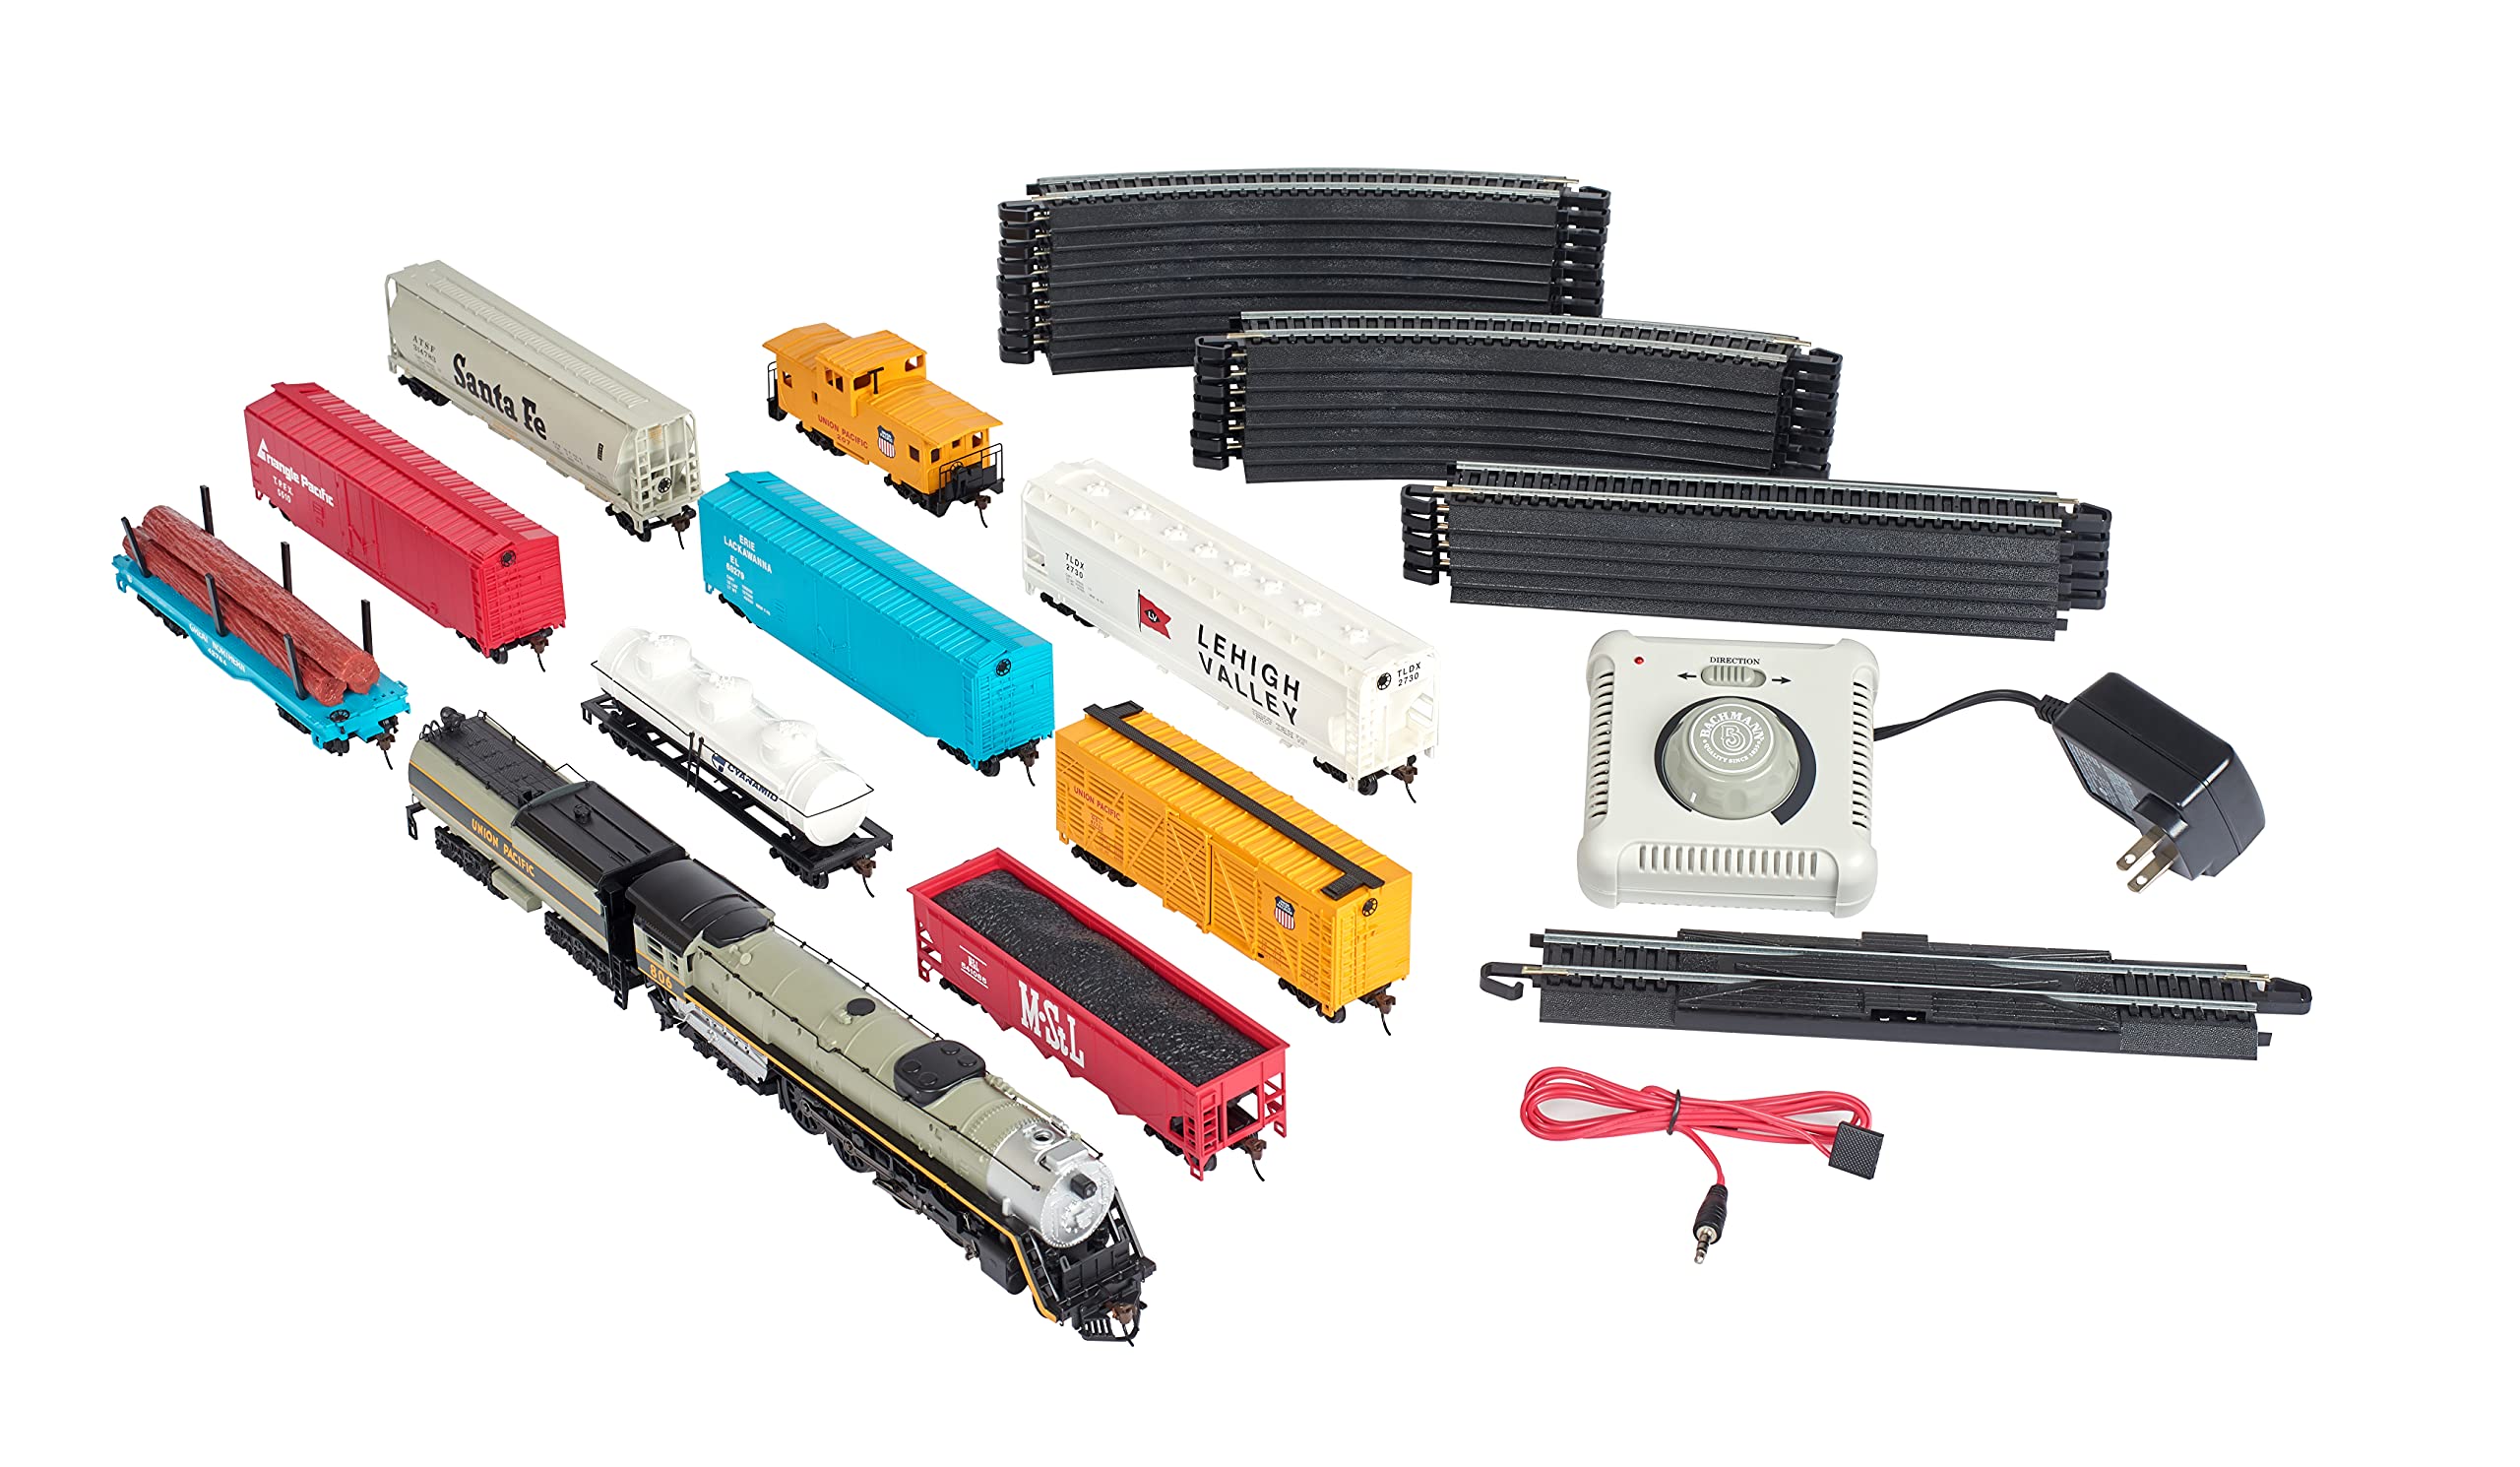 Bachmann Trains - Overland Limited Ready To Run Electric Train Set - HO Scale